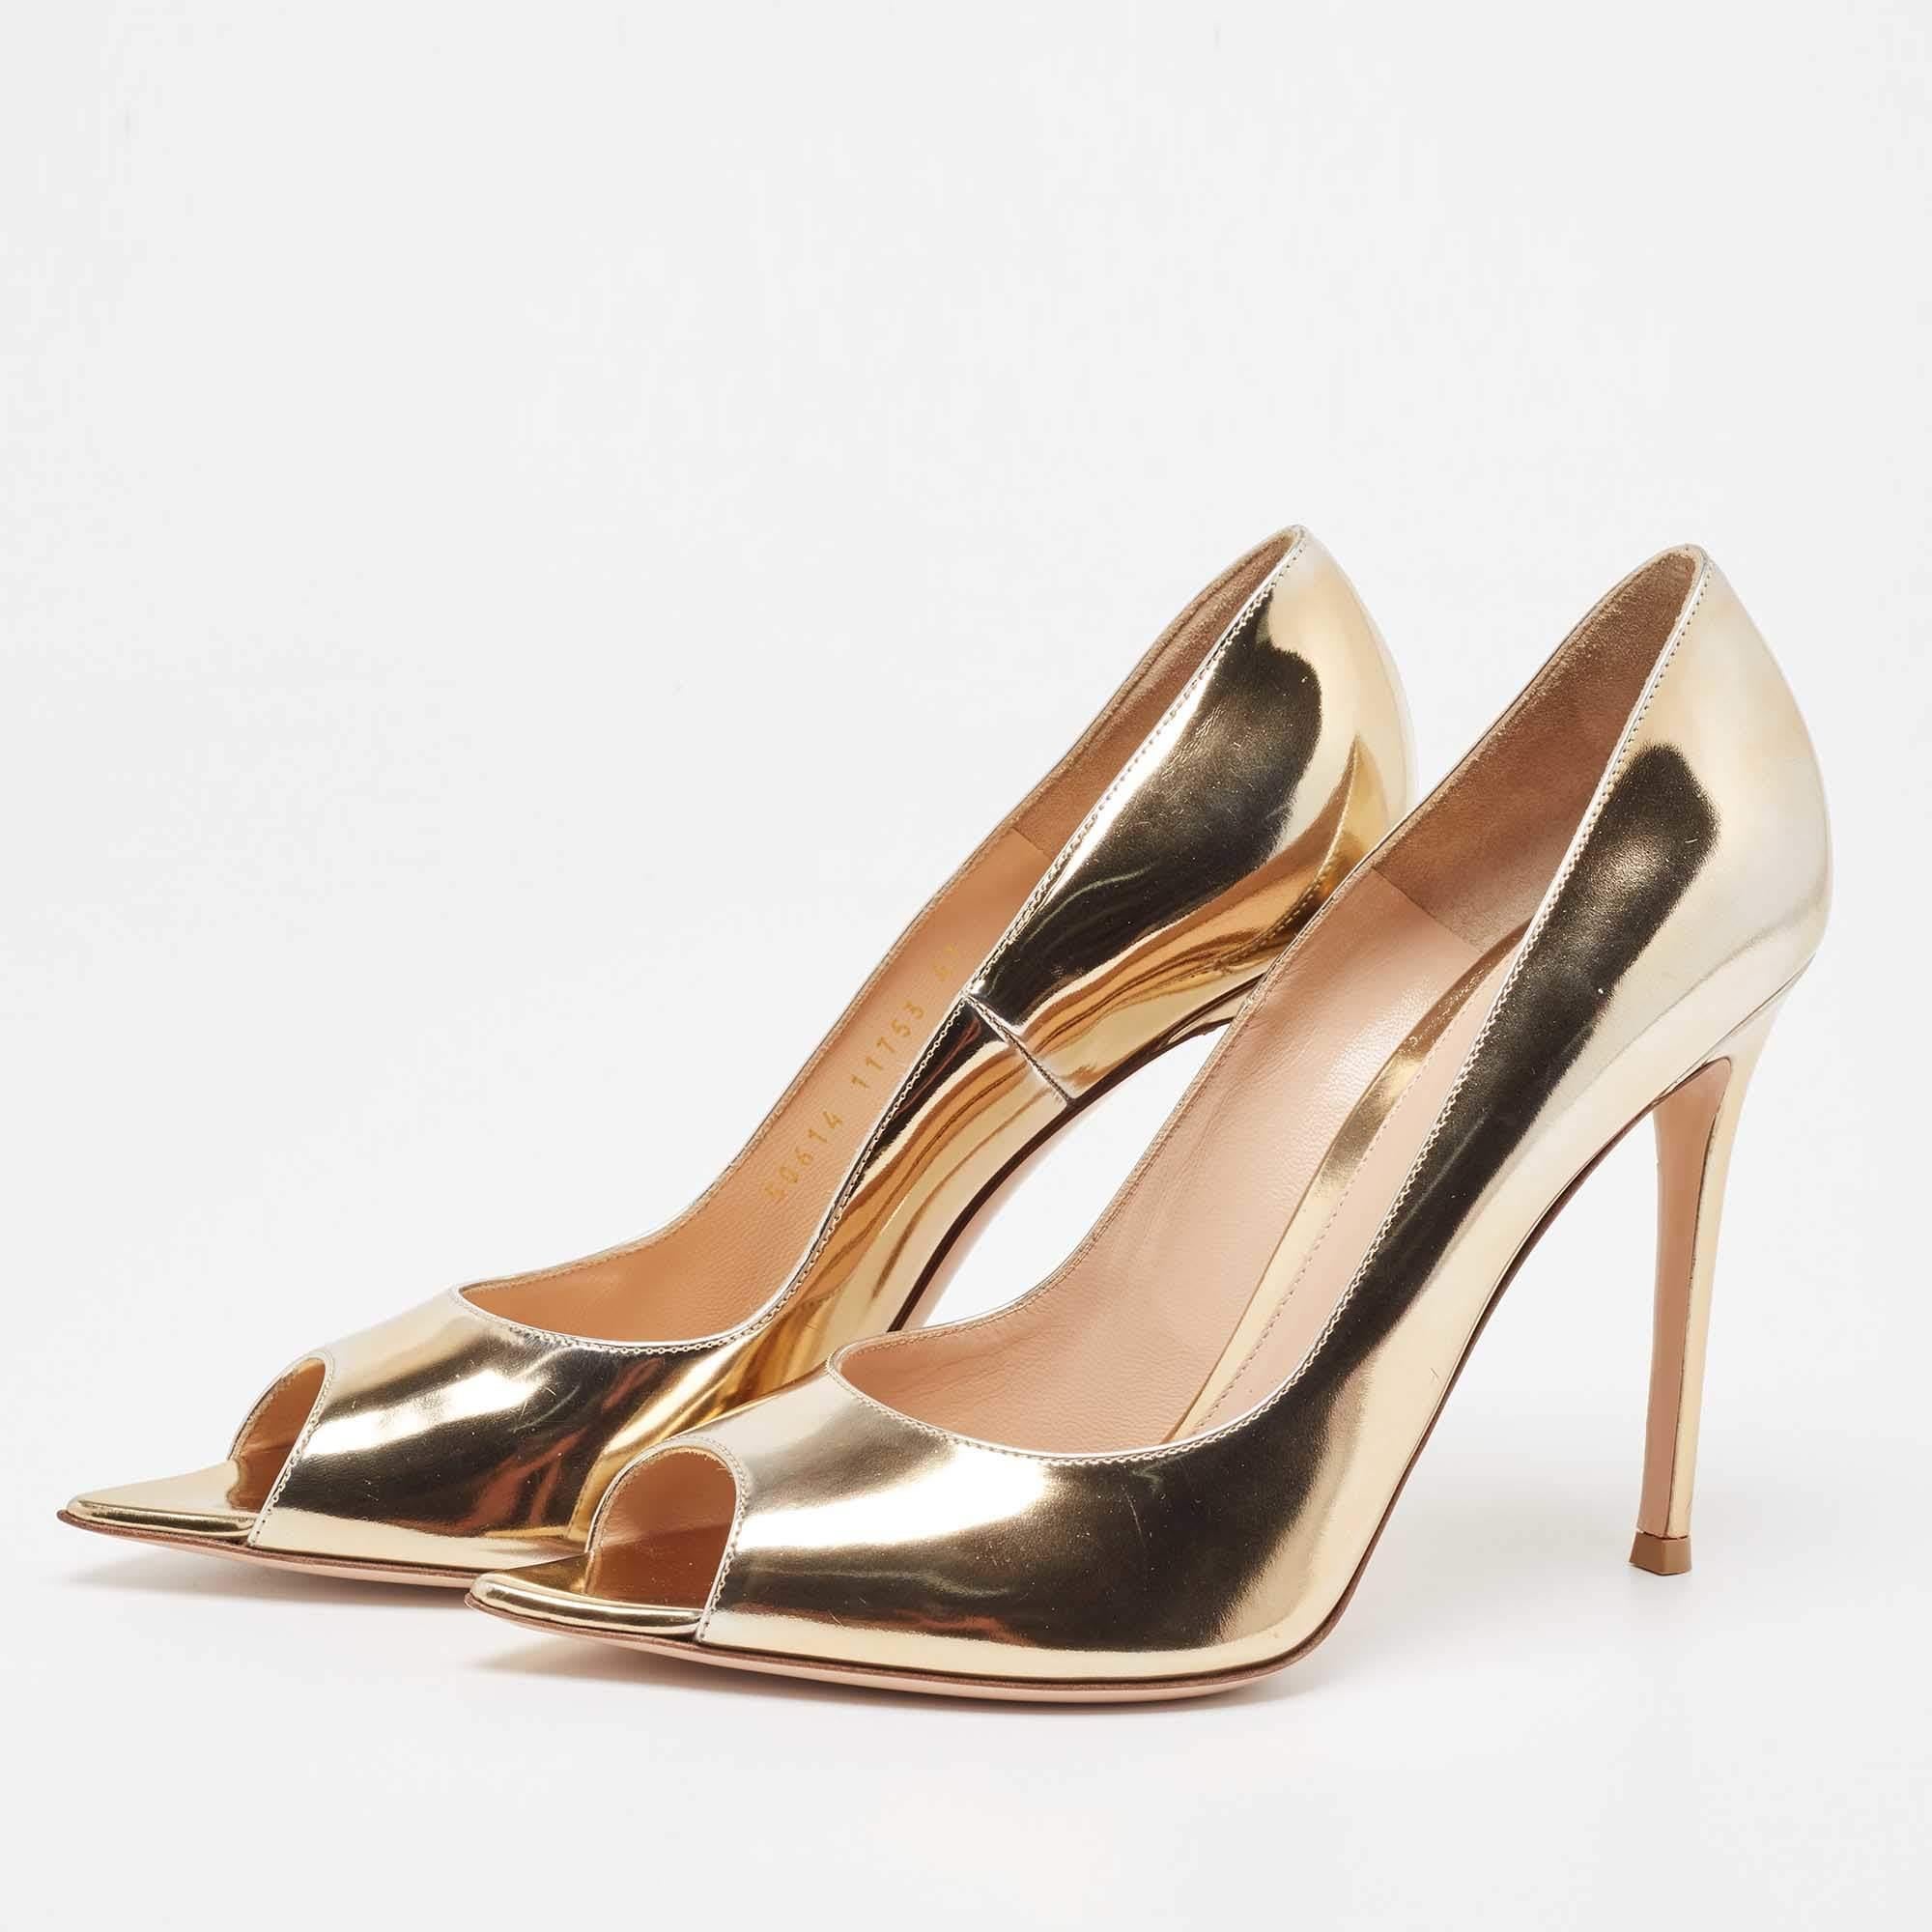 The fashion house’s tradition of excellence, coupled with modern design sensibilities, works to make these Gianvito Rossi pumps a fabulous choice. They'll help you deliver a chic look with ease.

Includes
Original Dustbag, Original Box, extra heel